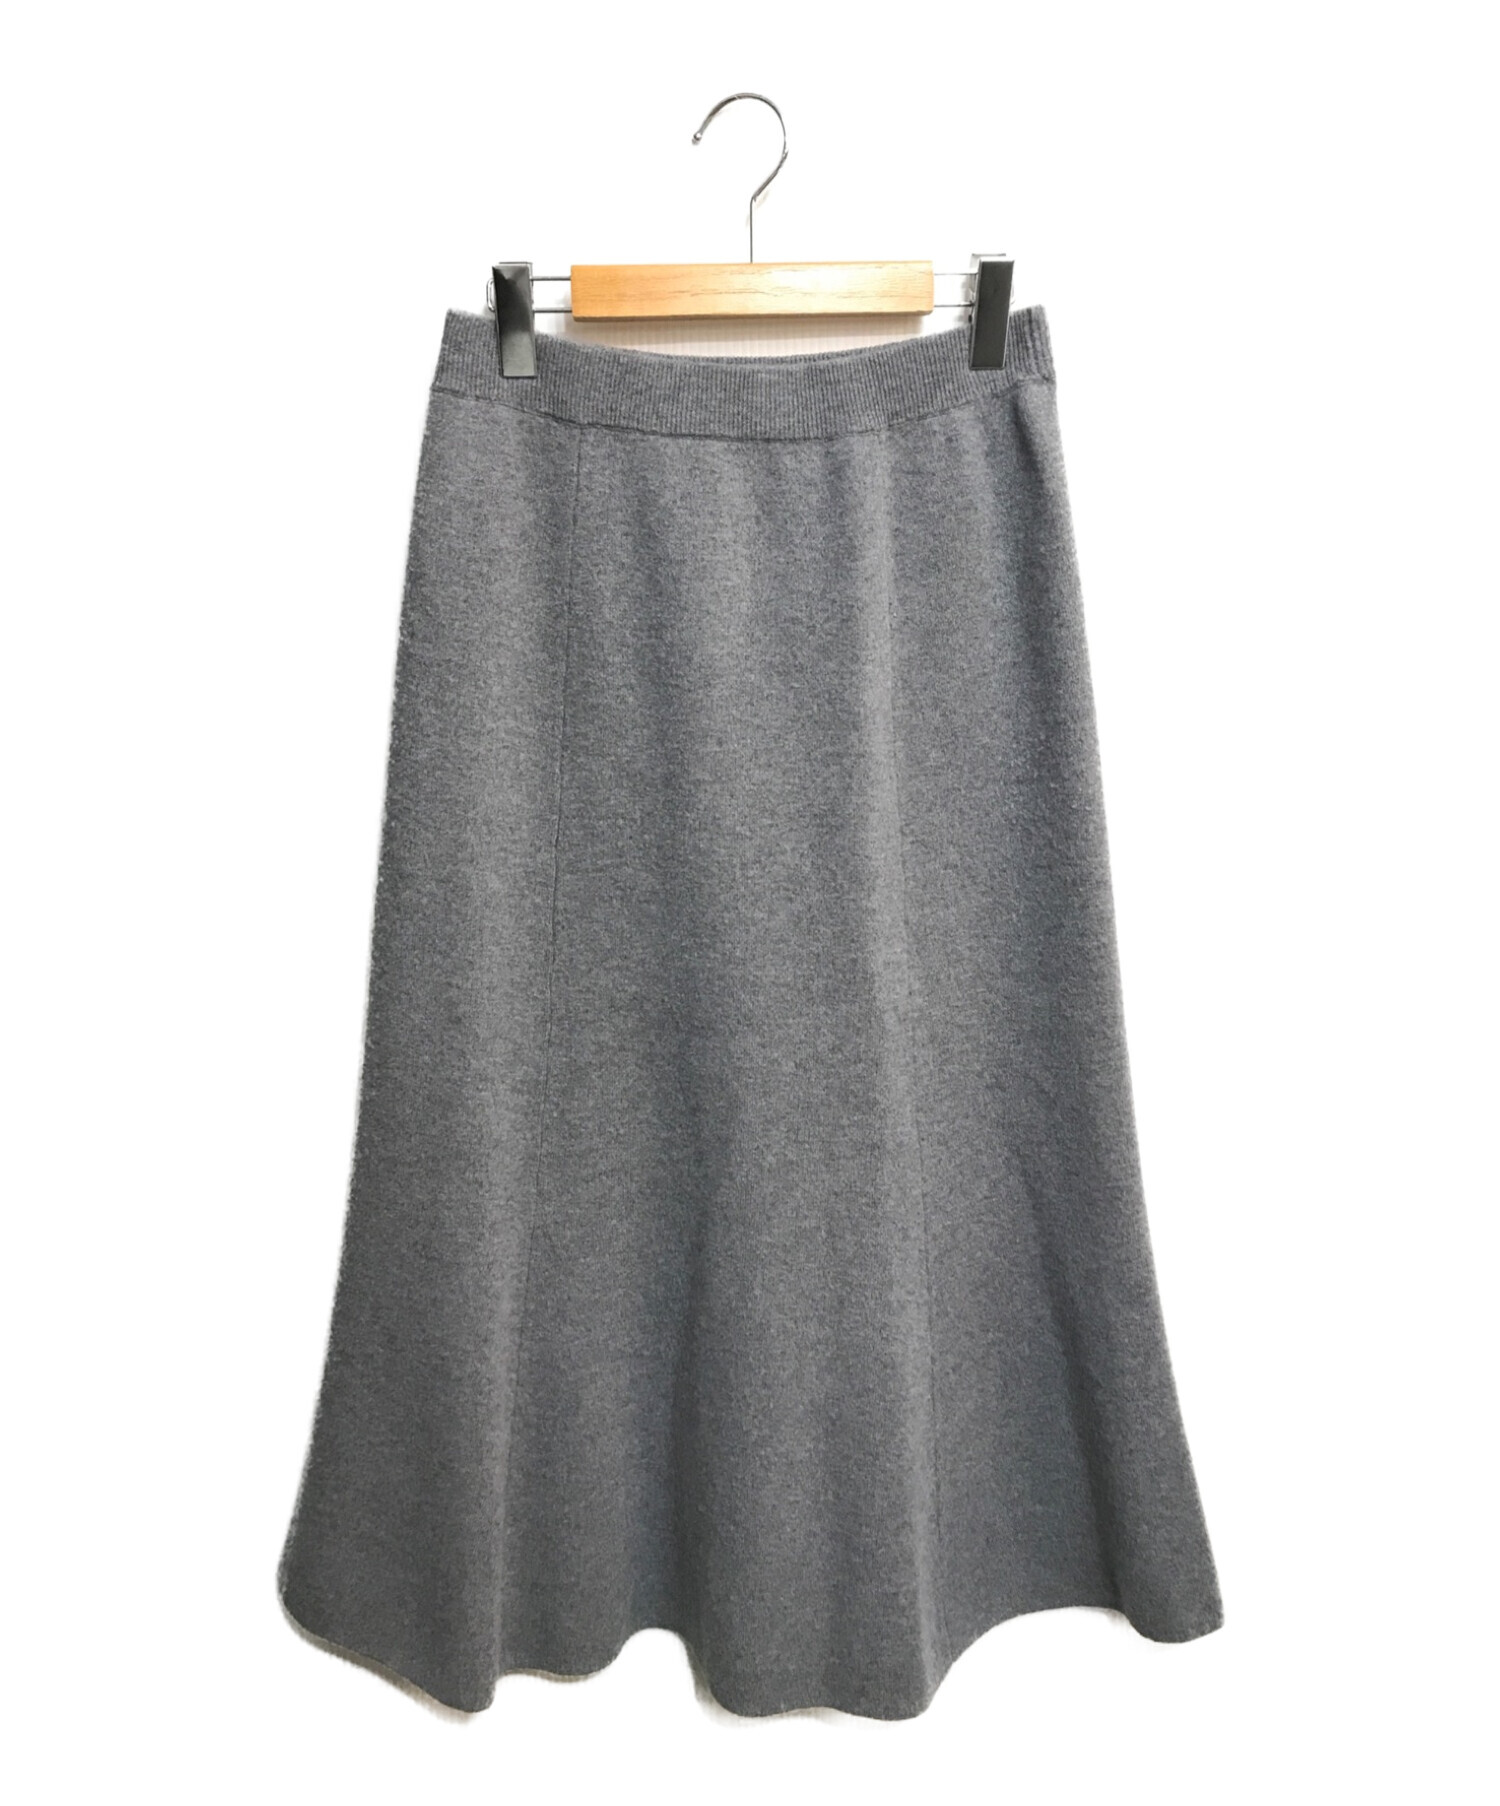 L'Appartement Knit Flare Skirt ﾍﾞｰｼﾞｭ 36スカート